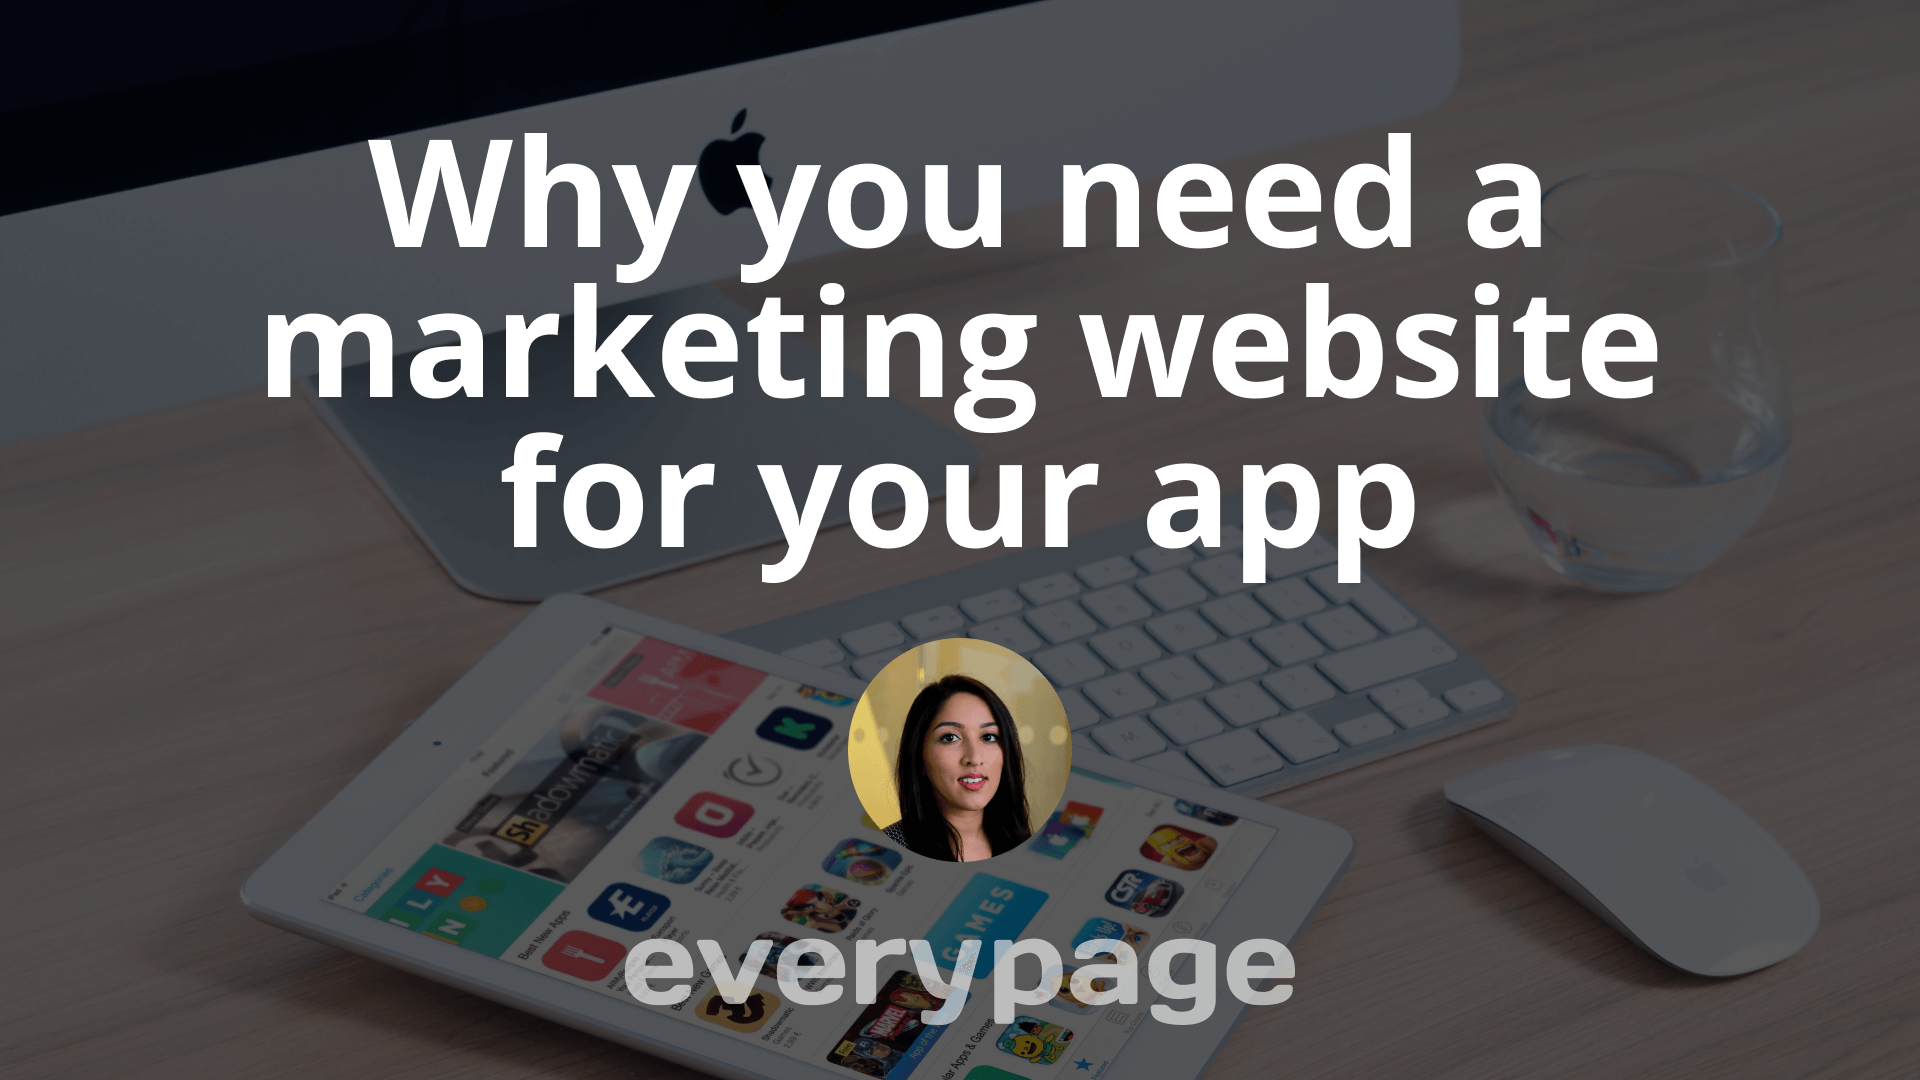 Why you need a marketing website for your app